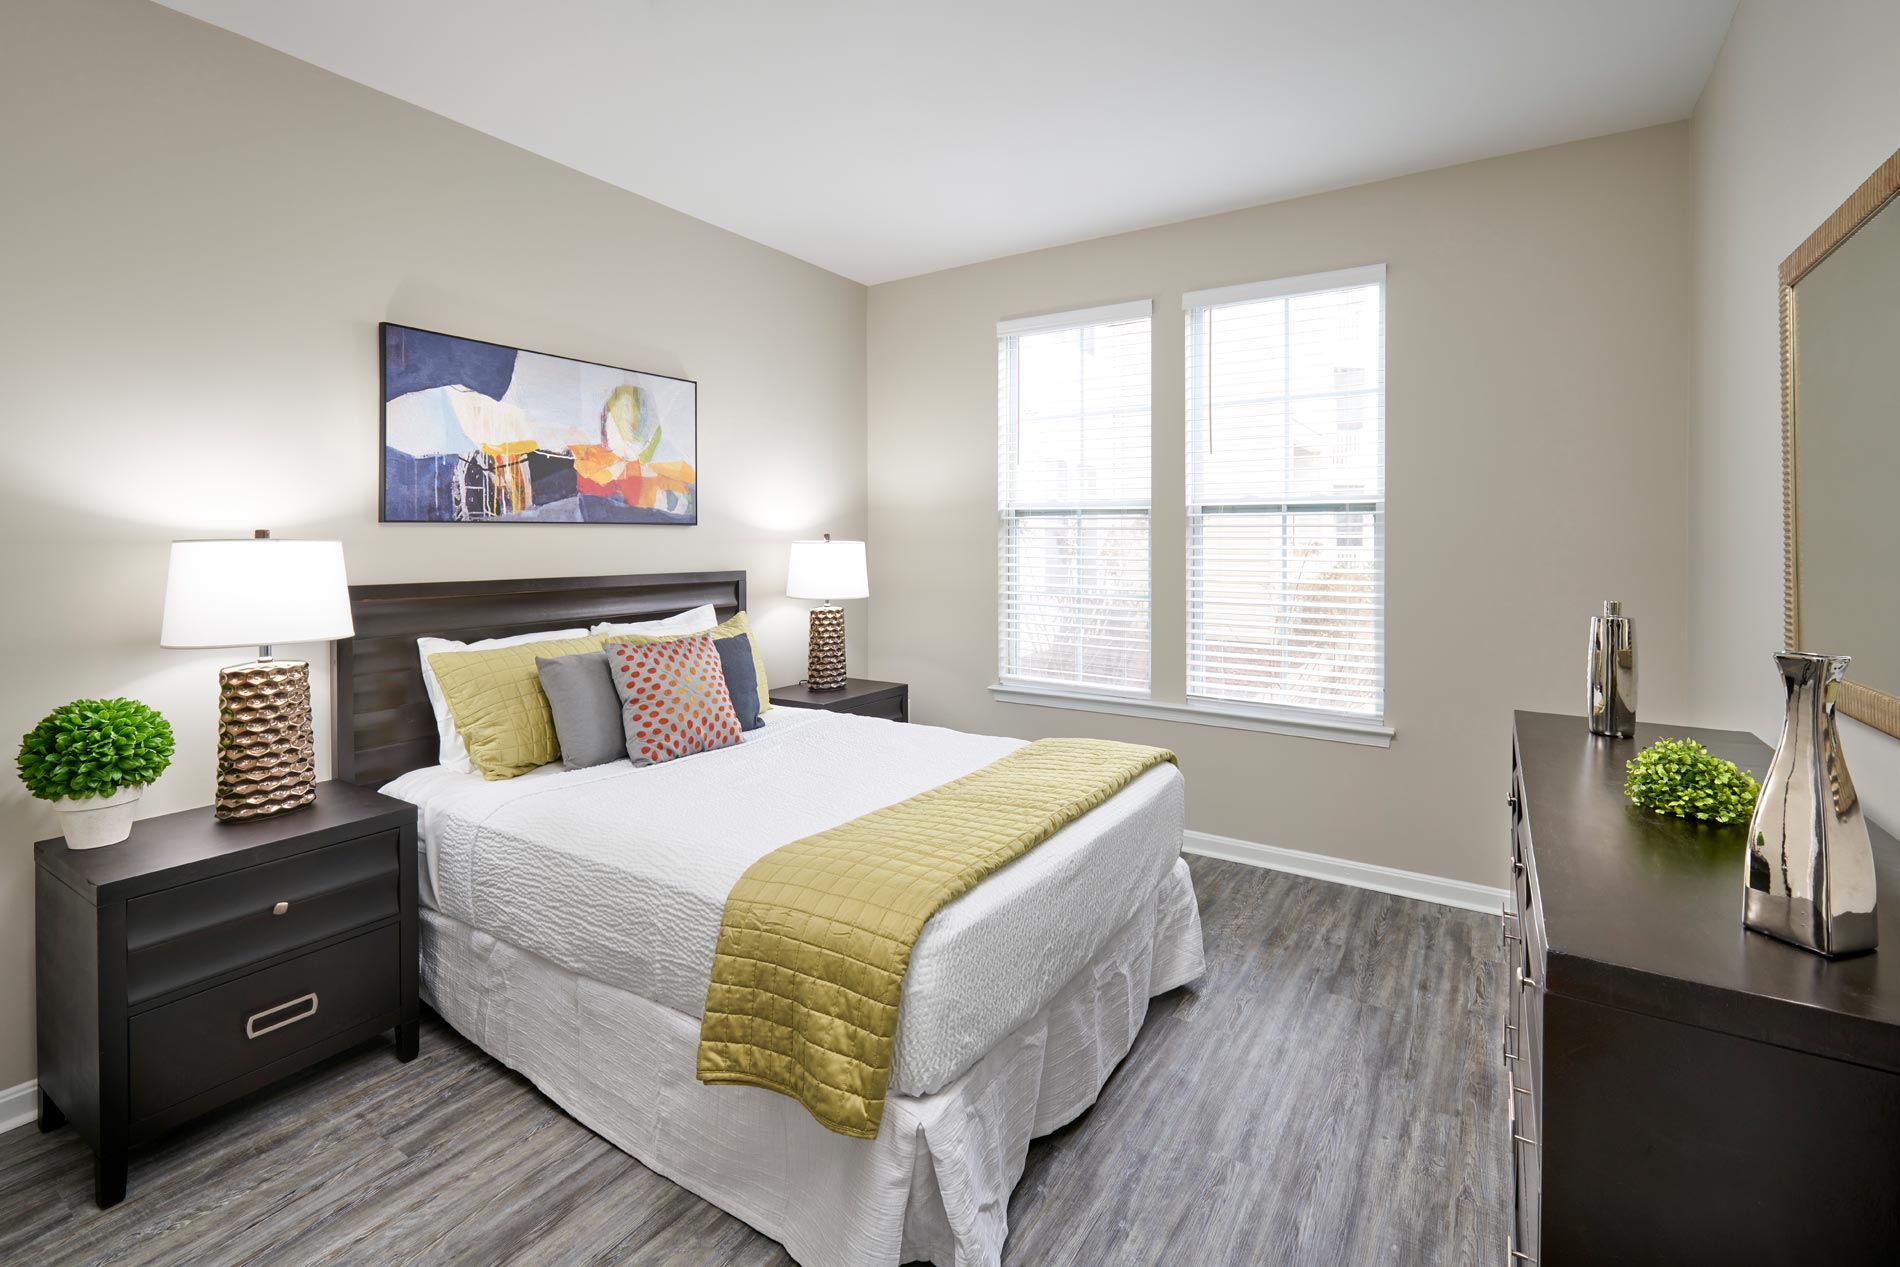 Quarters at Towson staged bedroom